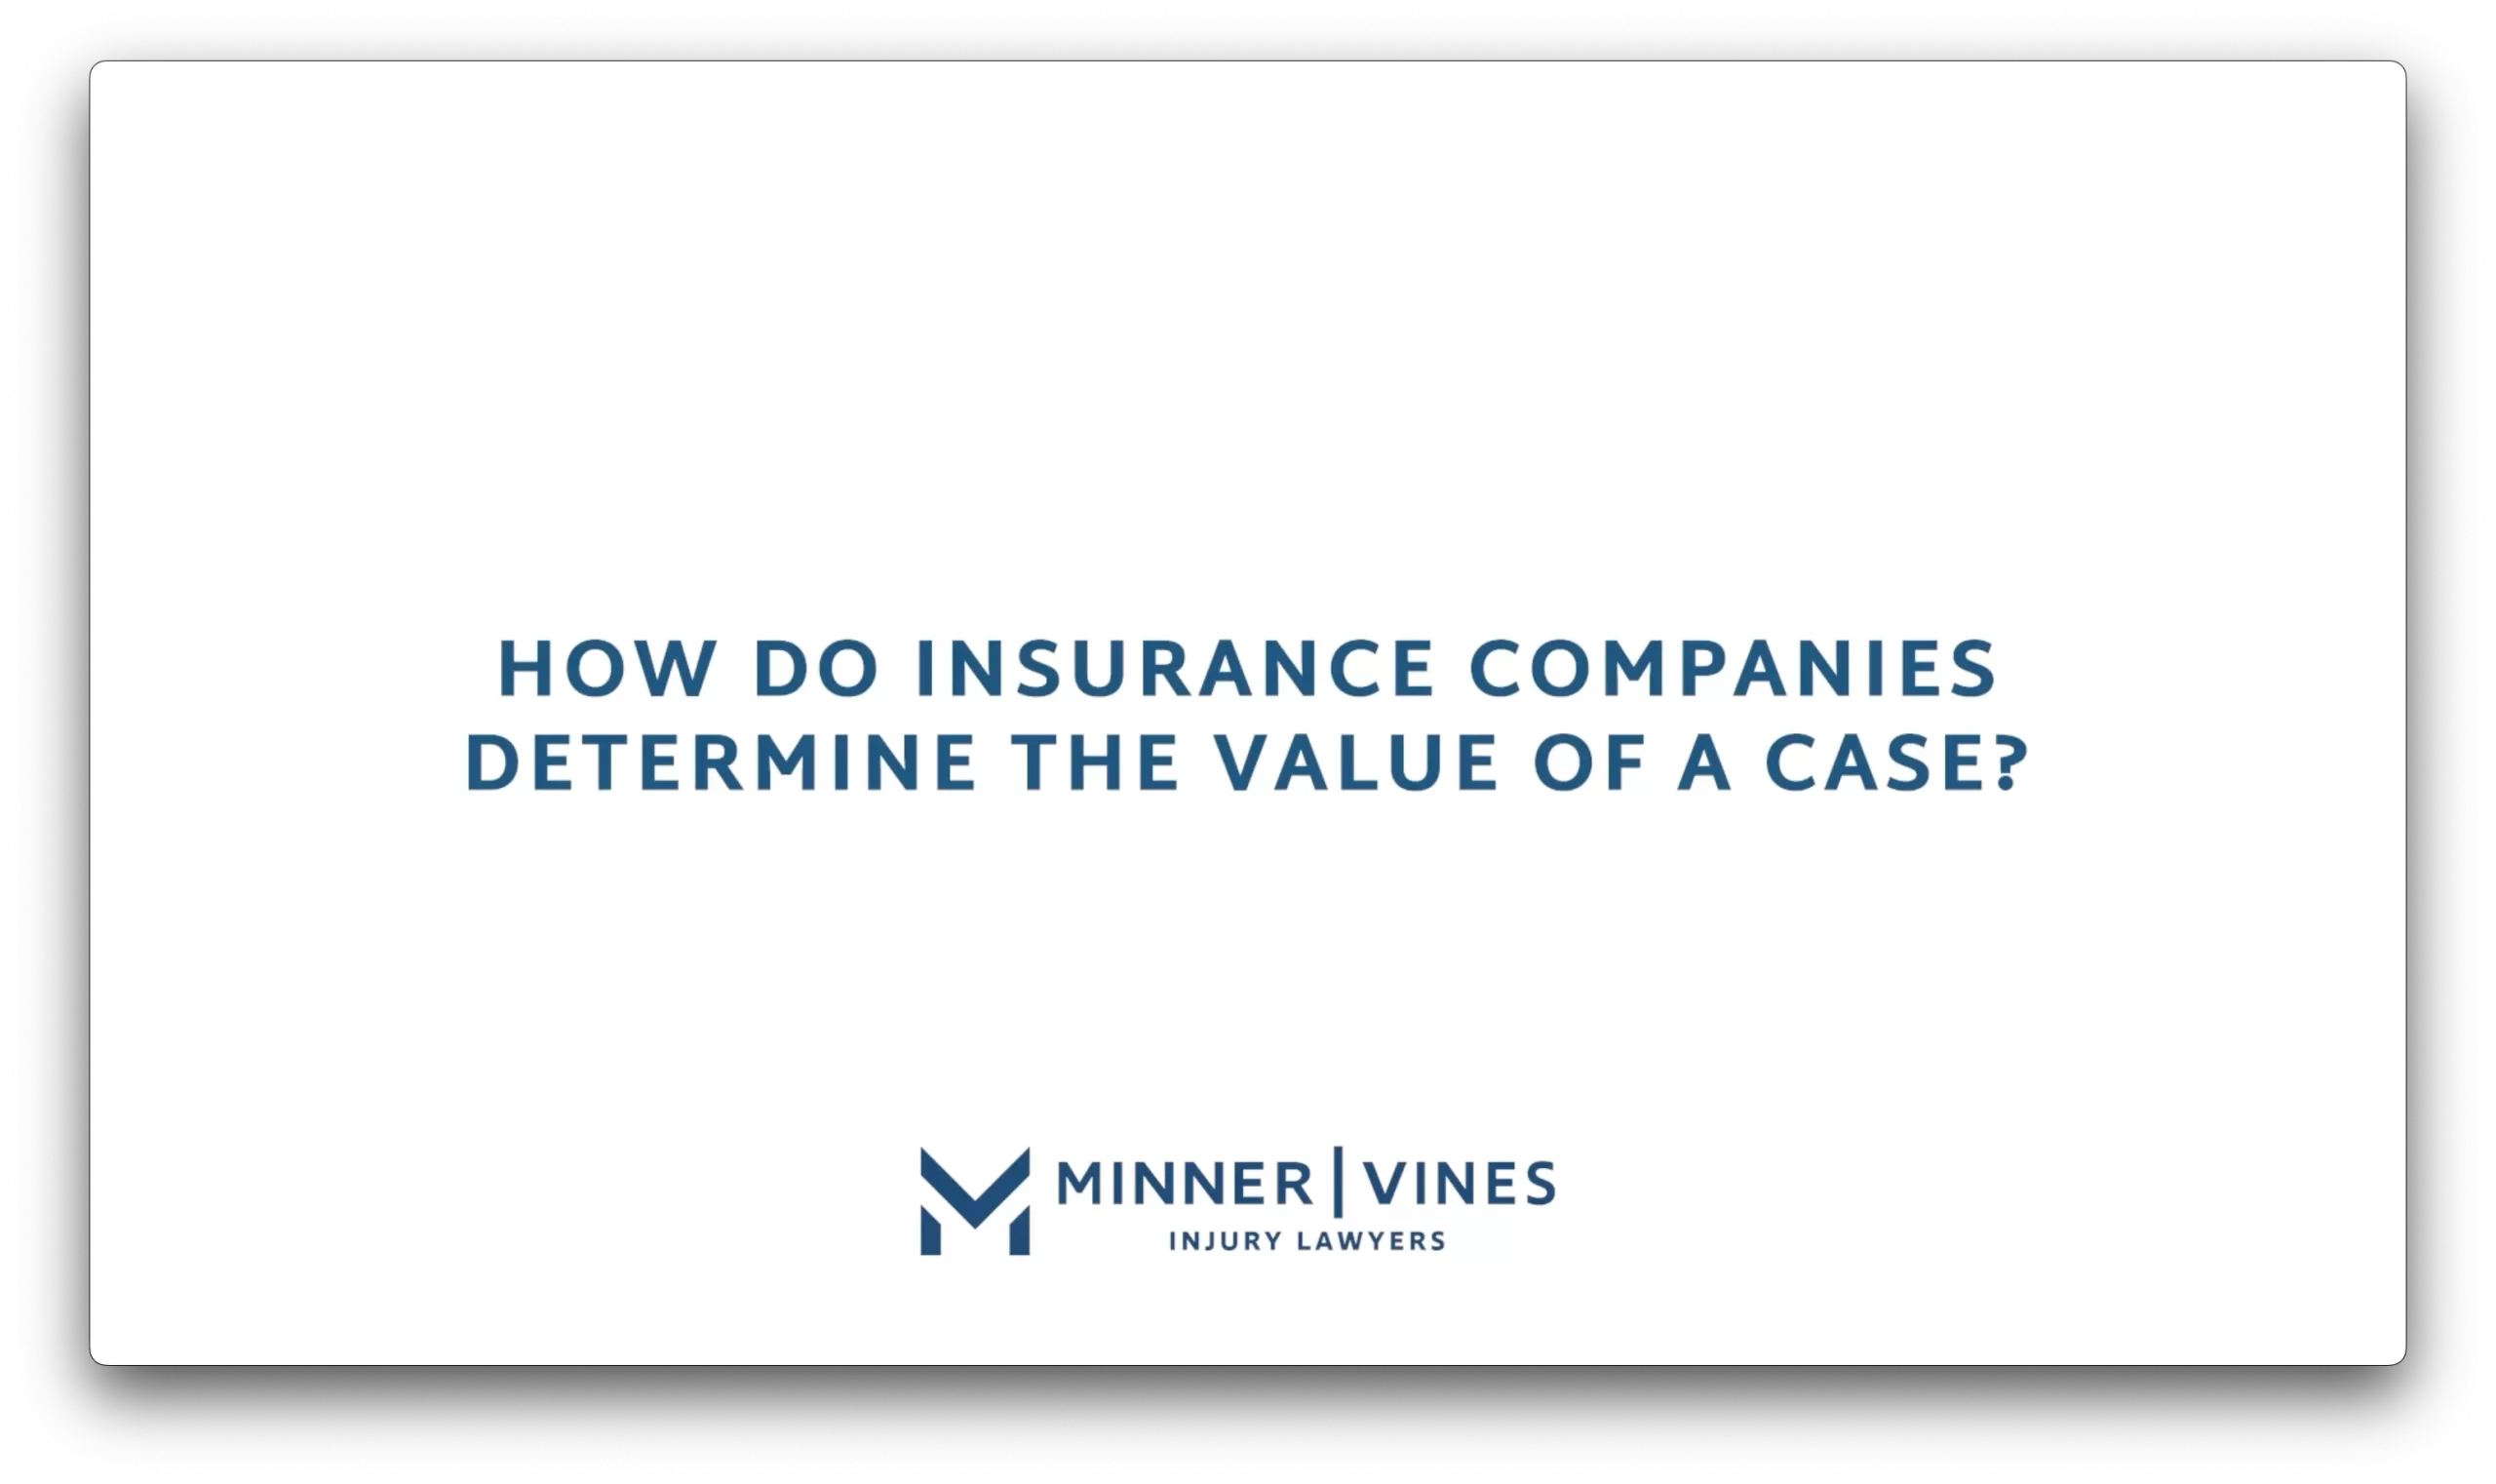 How do insurance companies determine the value of a case?